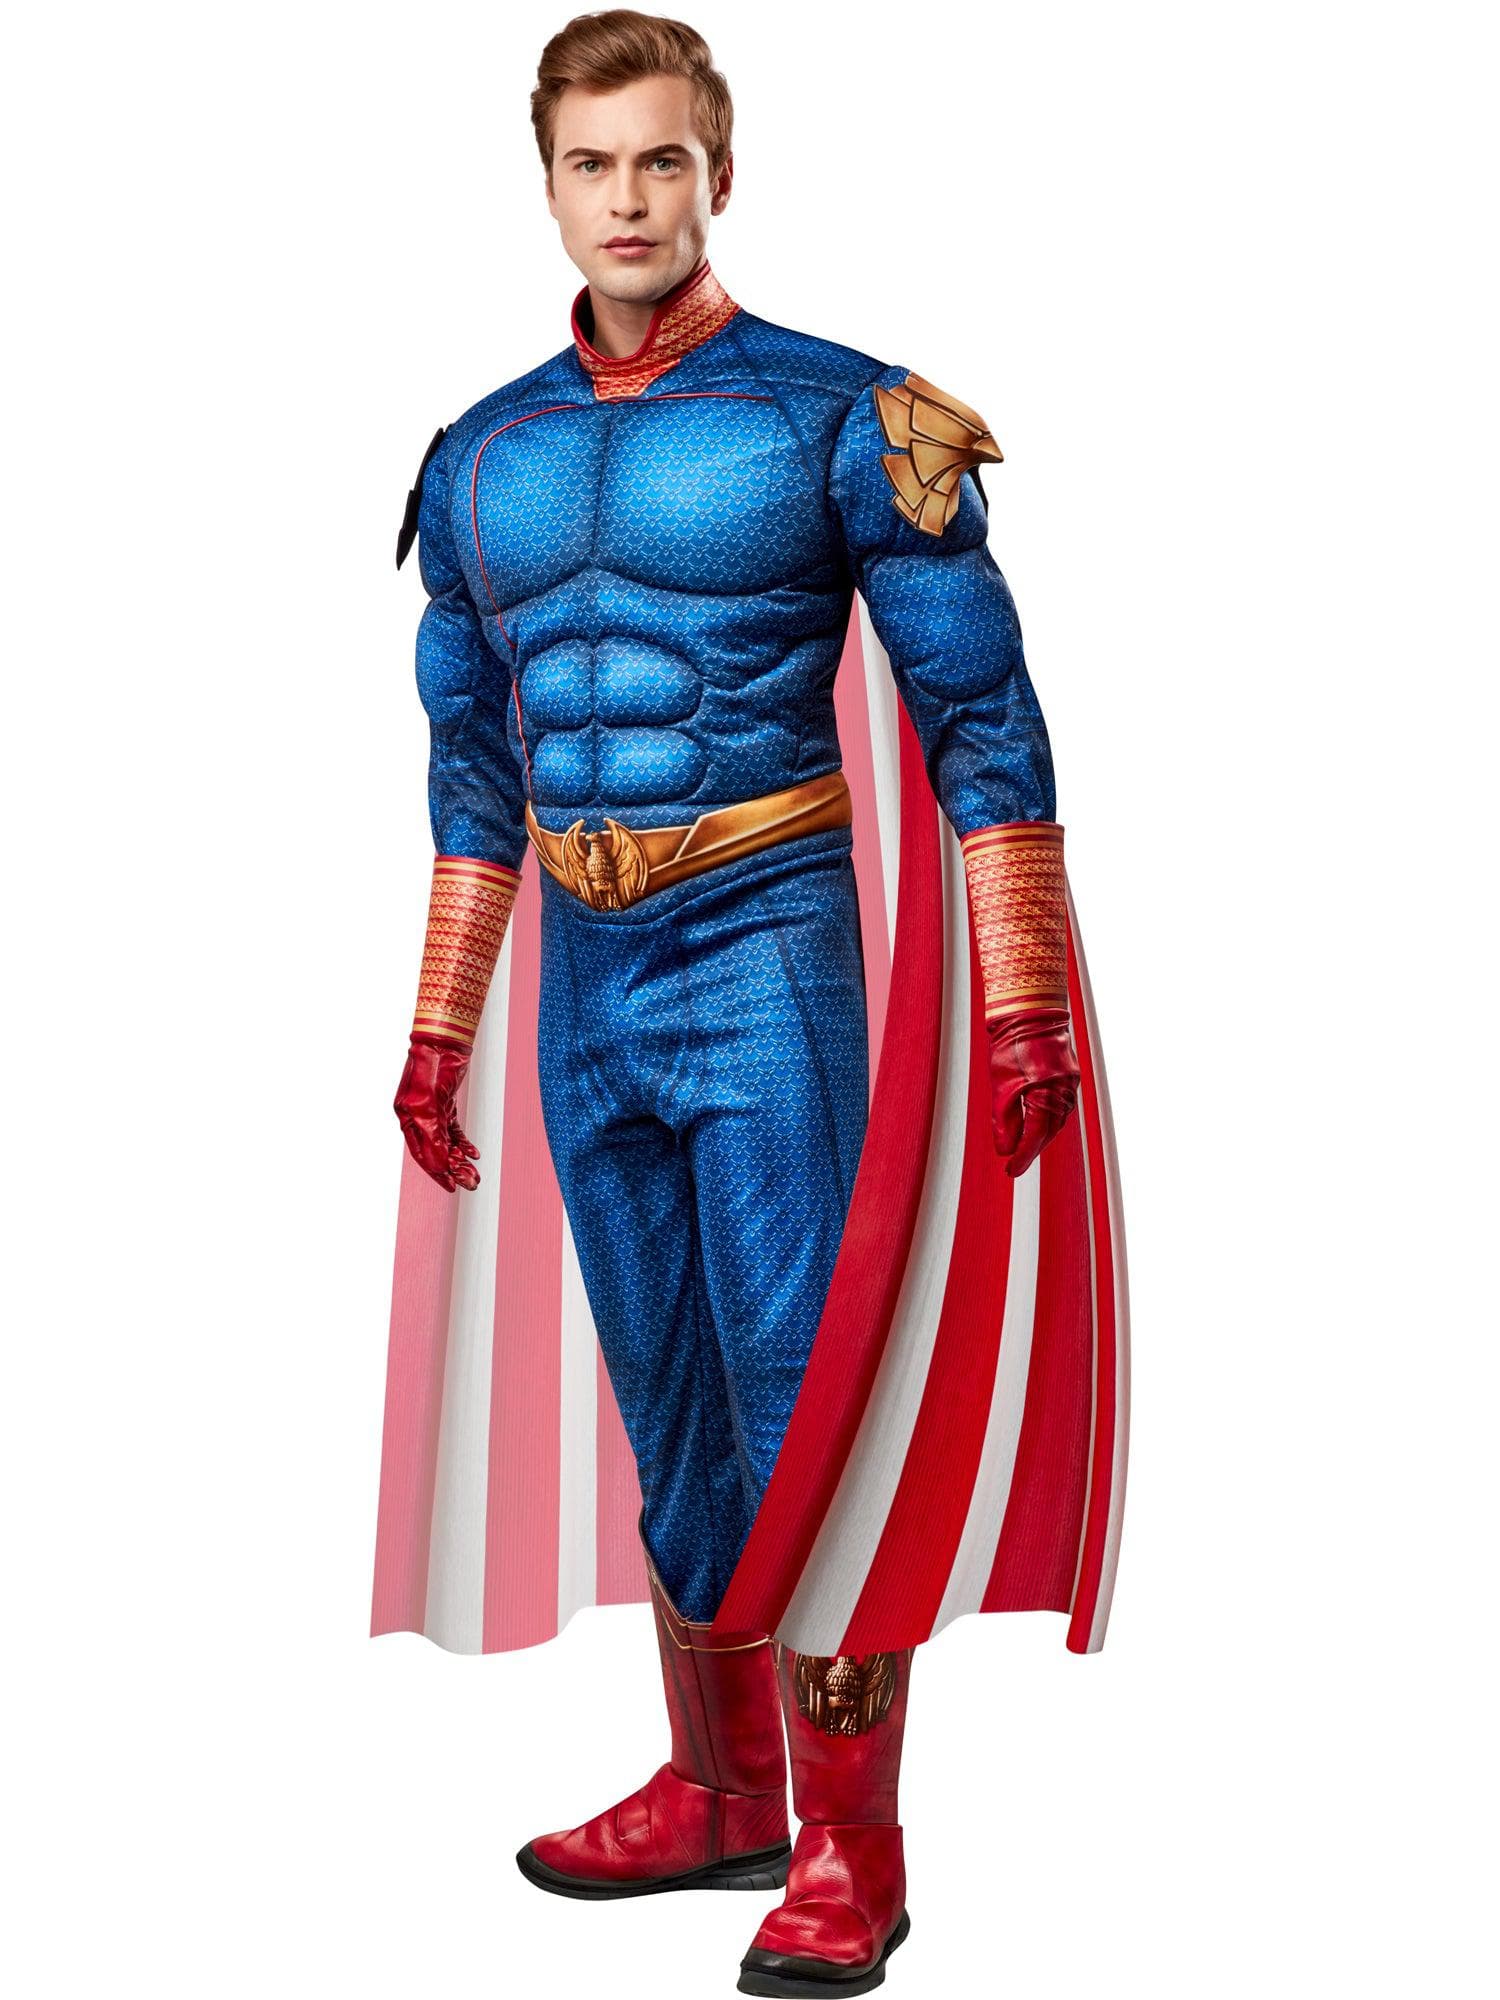 The Boys Homelander Adult Deluxe Costume - costumes.com